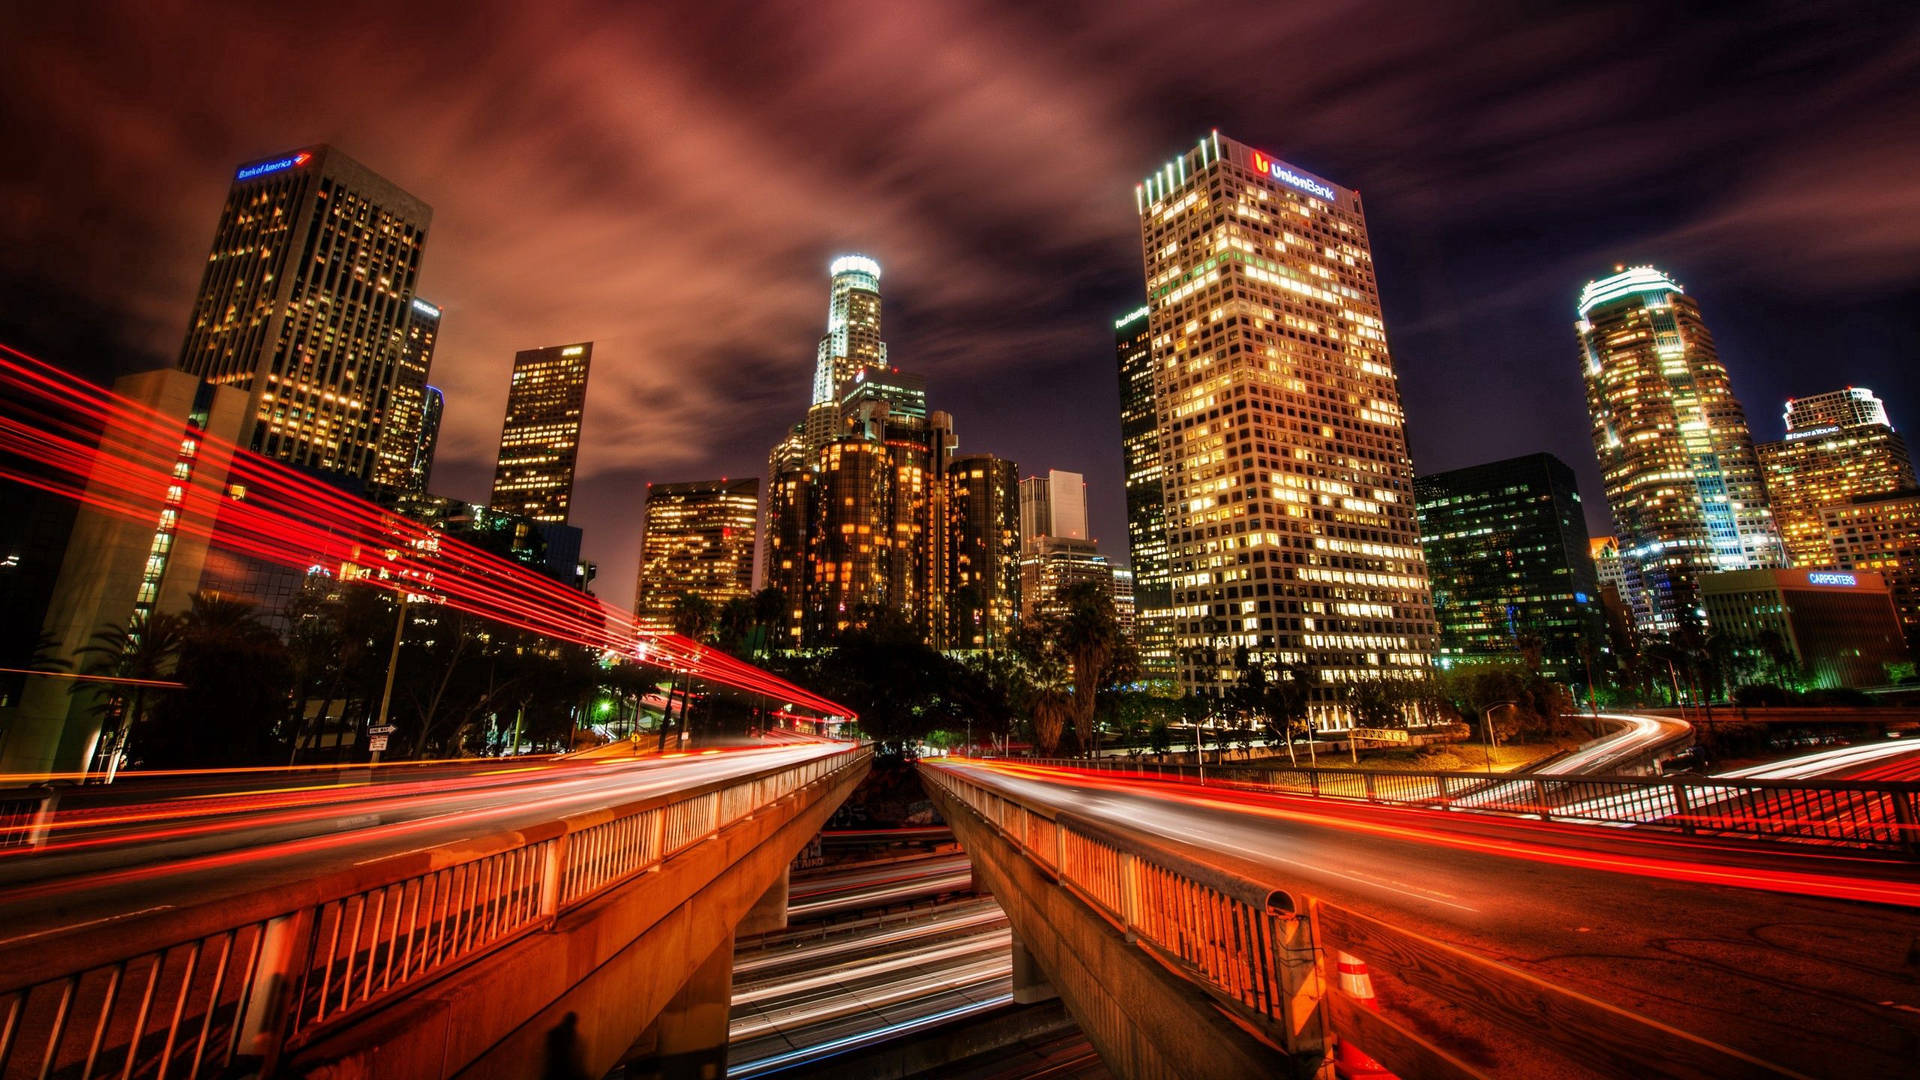 Free Los Angeles Wallpaper Downloads, [200+] Los Angeles Wallpapers for  FREE 